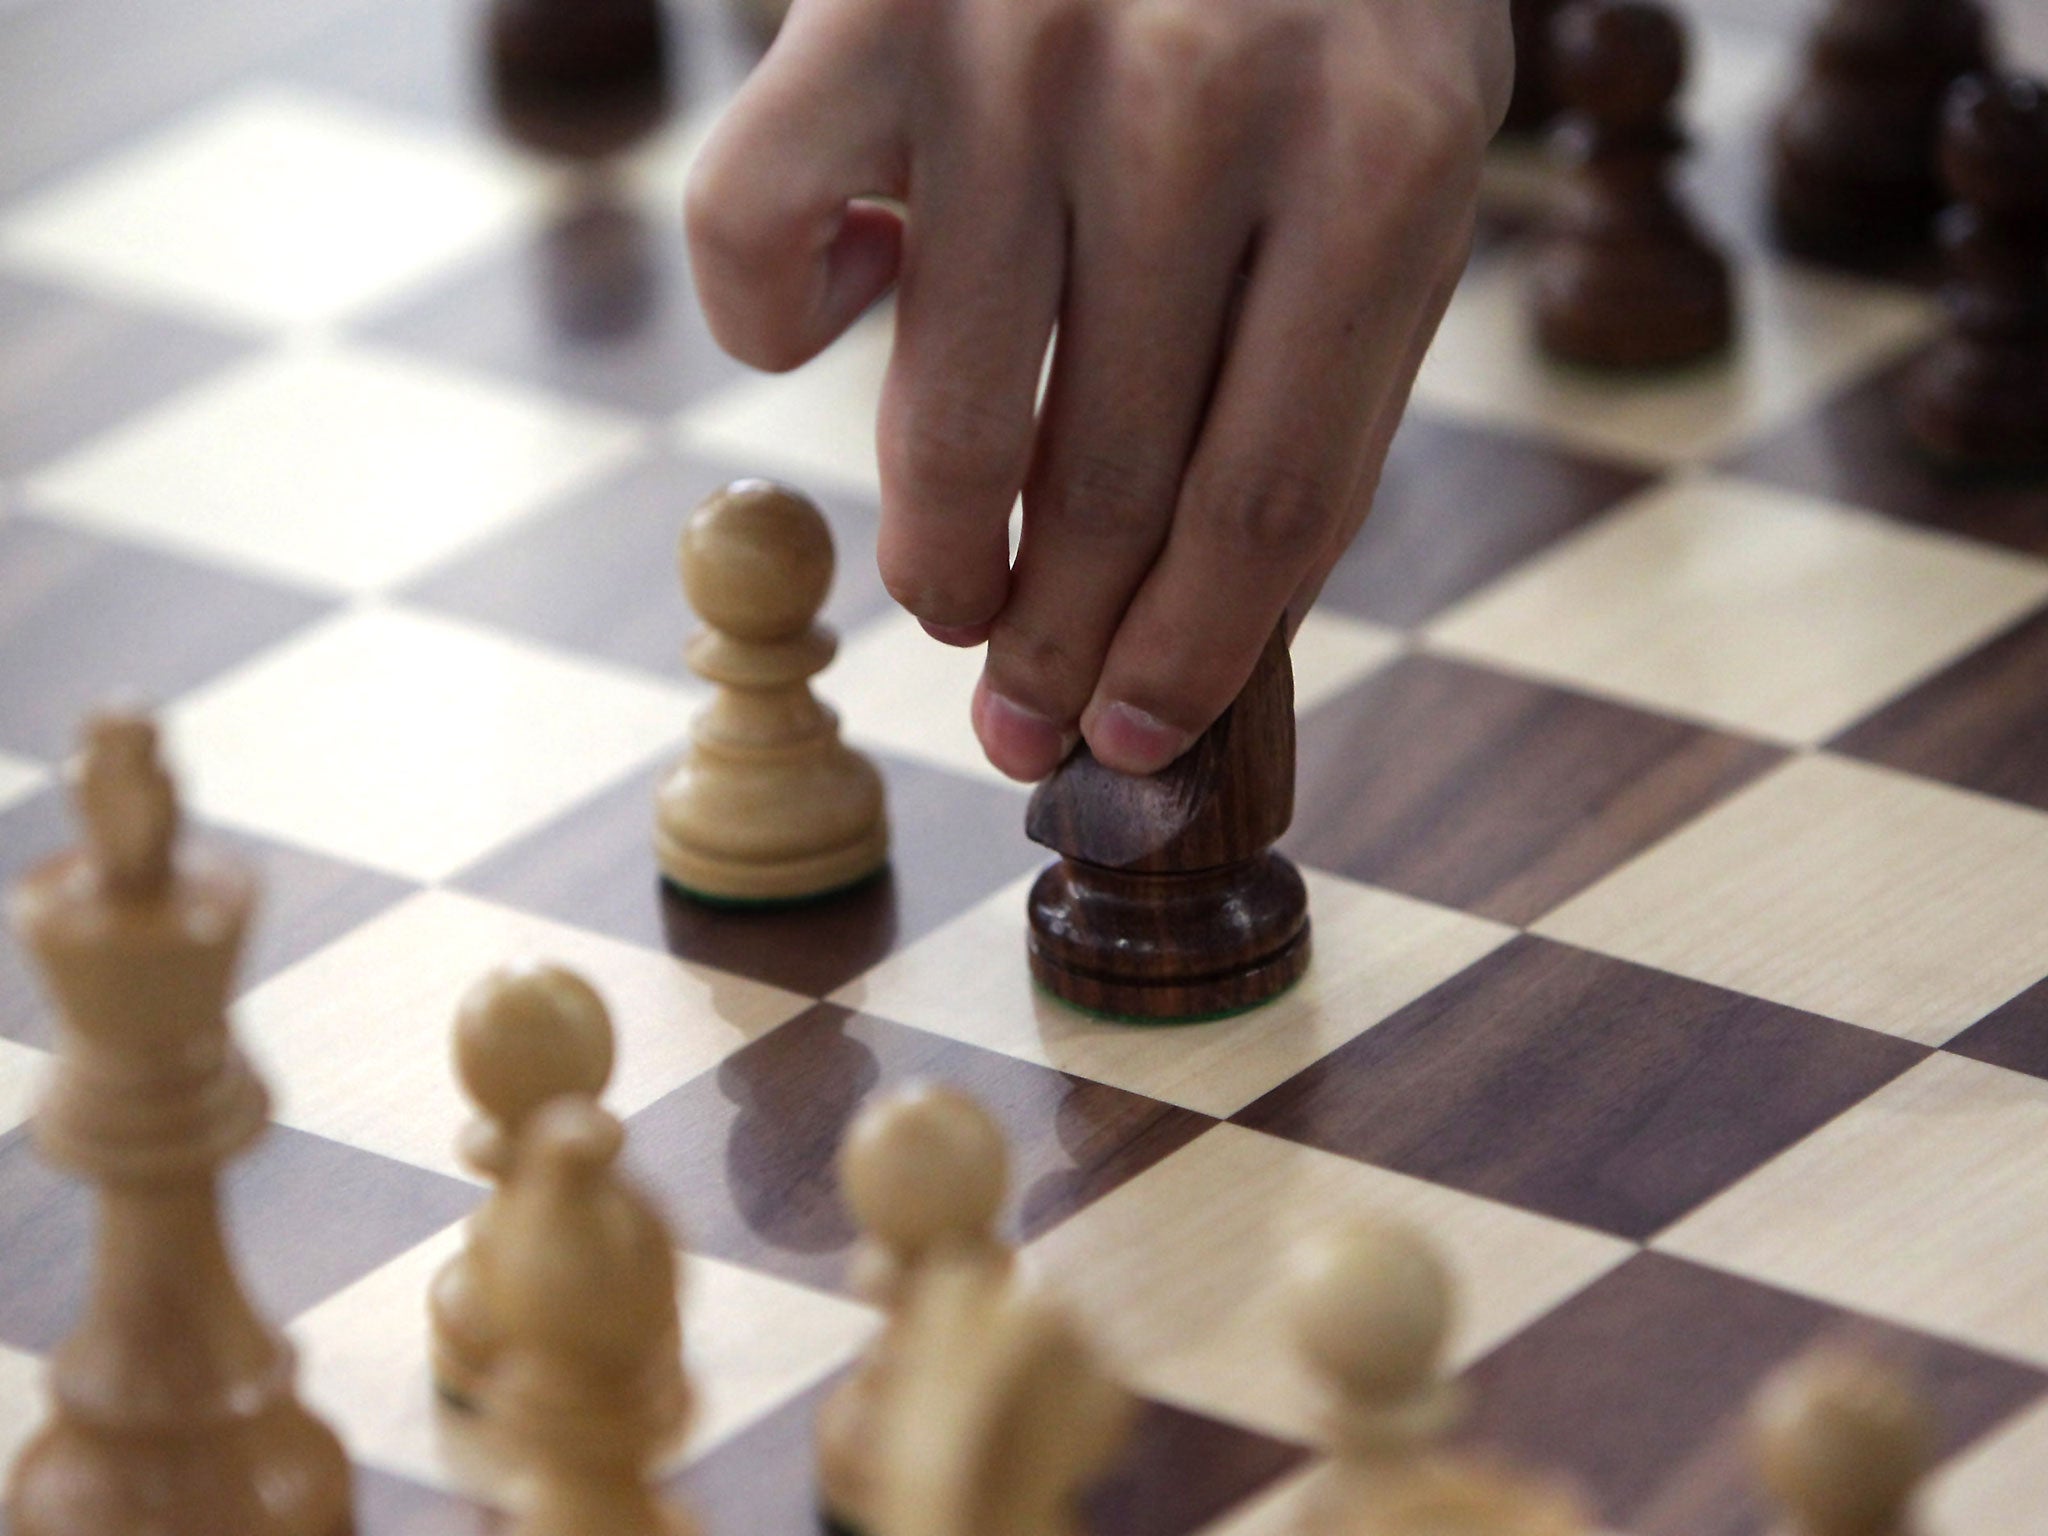 A player competes in the Chess, Men's Classical round 2 during day three of the 4th Asian Indoor & Martial Arts Games at Yonsei International Campus on July 1, 2013 in Incheon, South Korea.